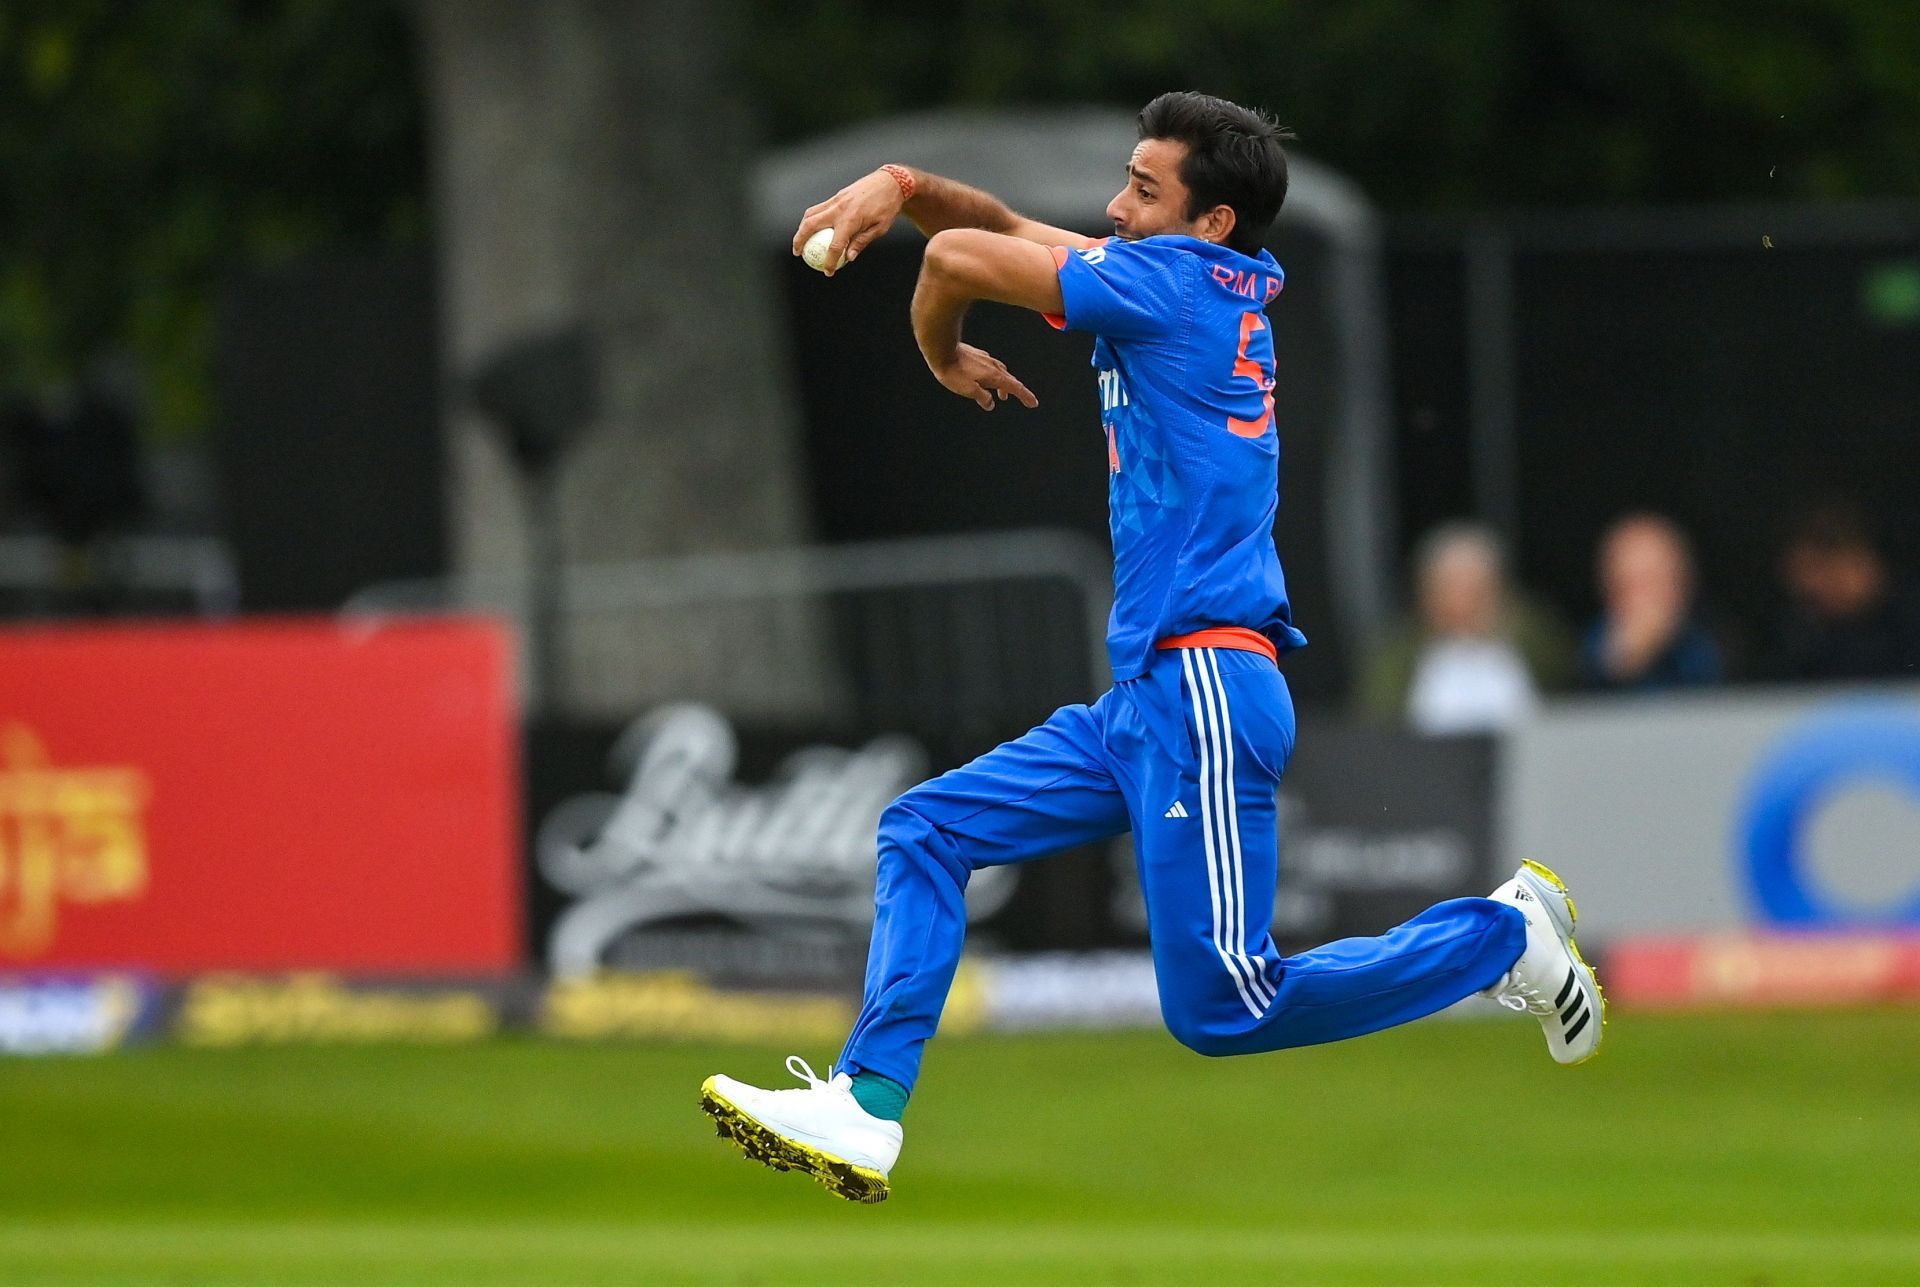 Ravi Bishnoi bowled a penetrative spell in the first T20I